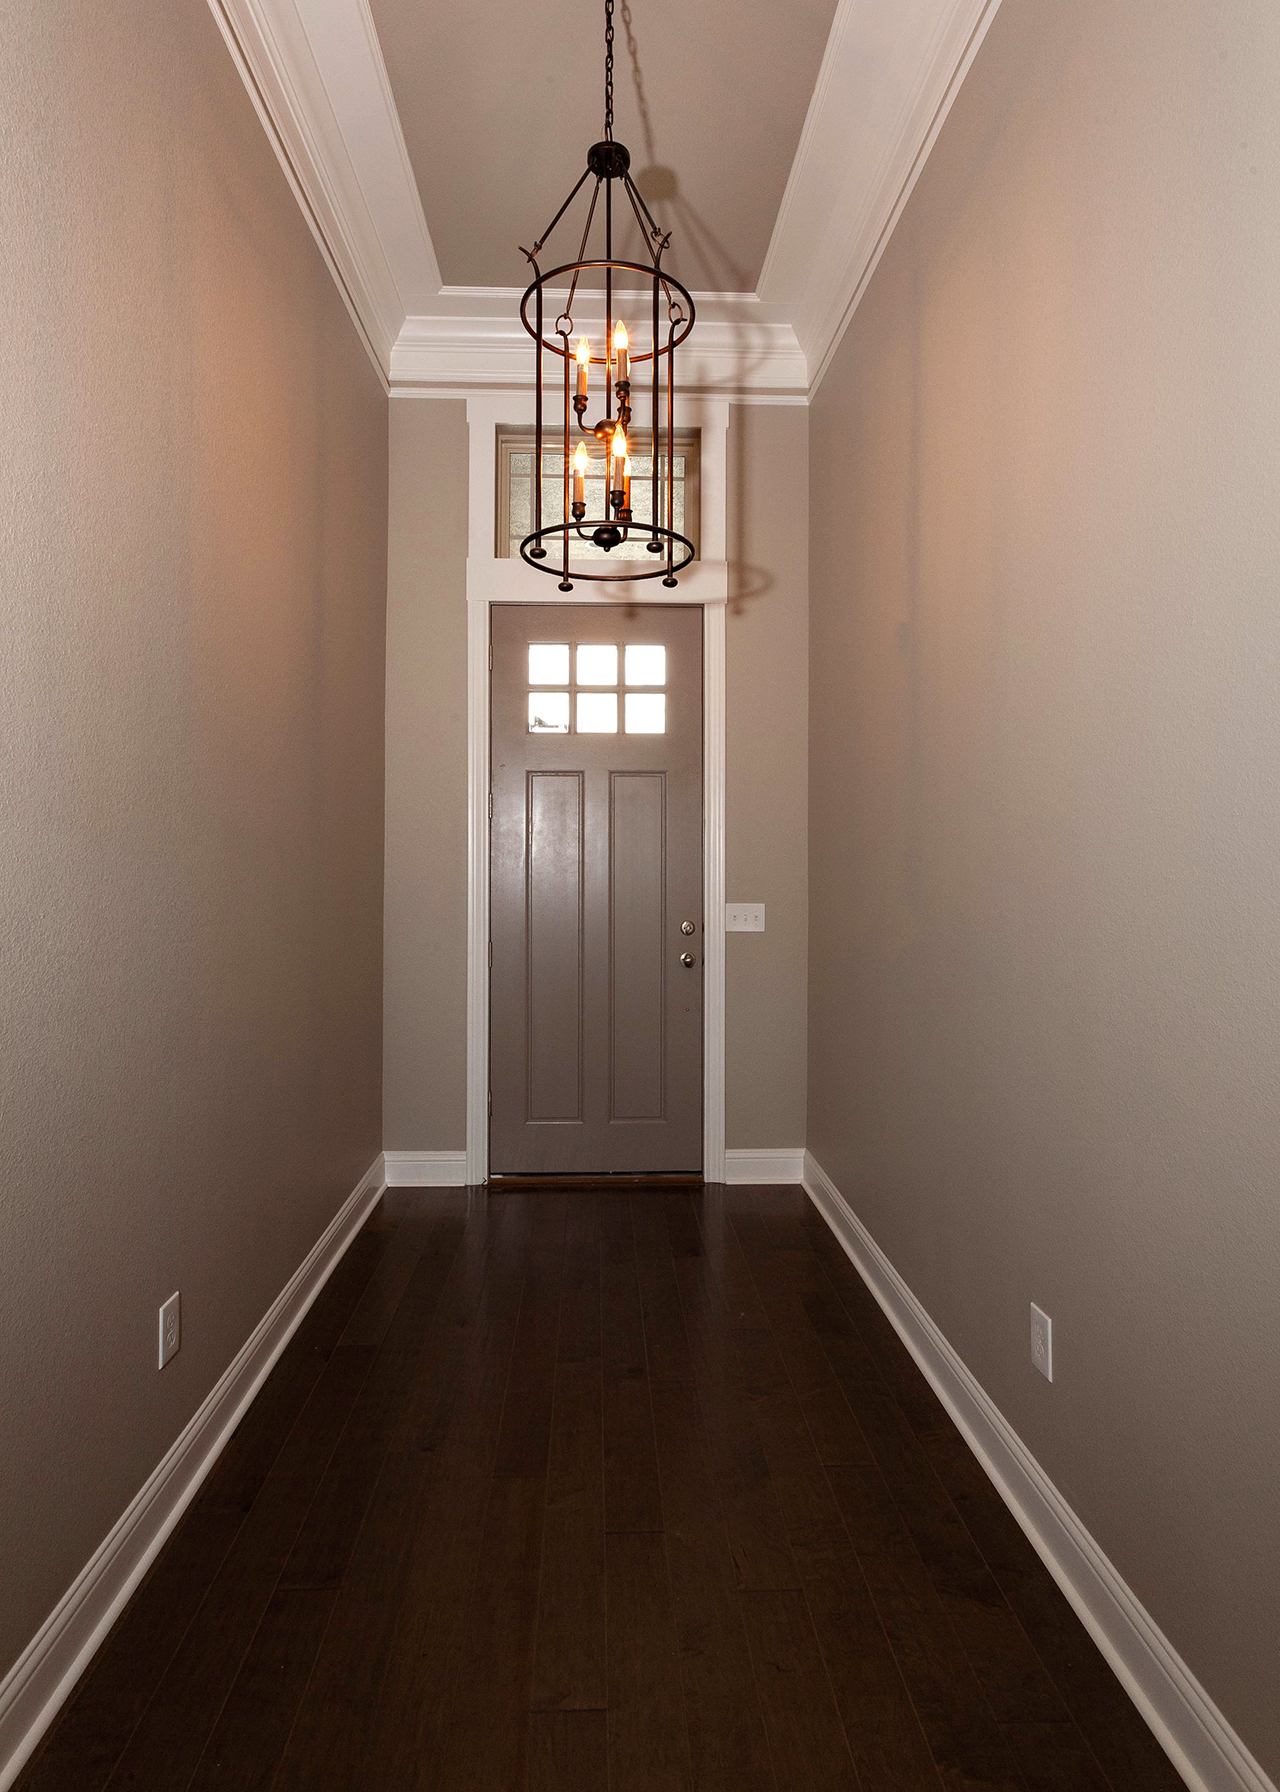 195 Hidden Grove Court Entry With modern hanging chandelier